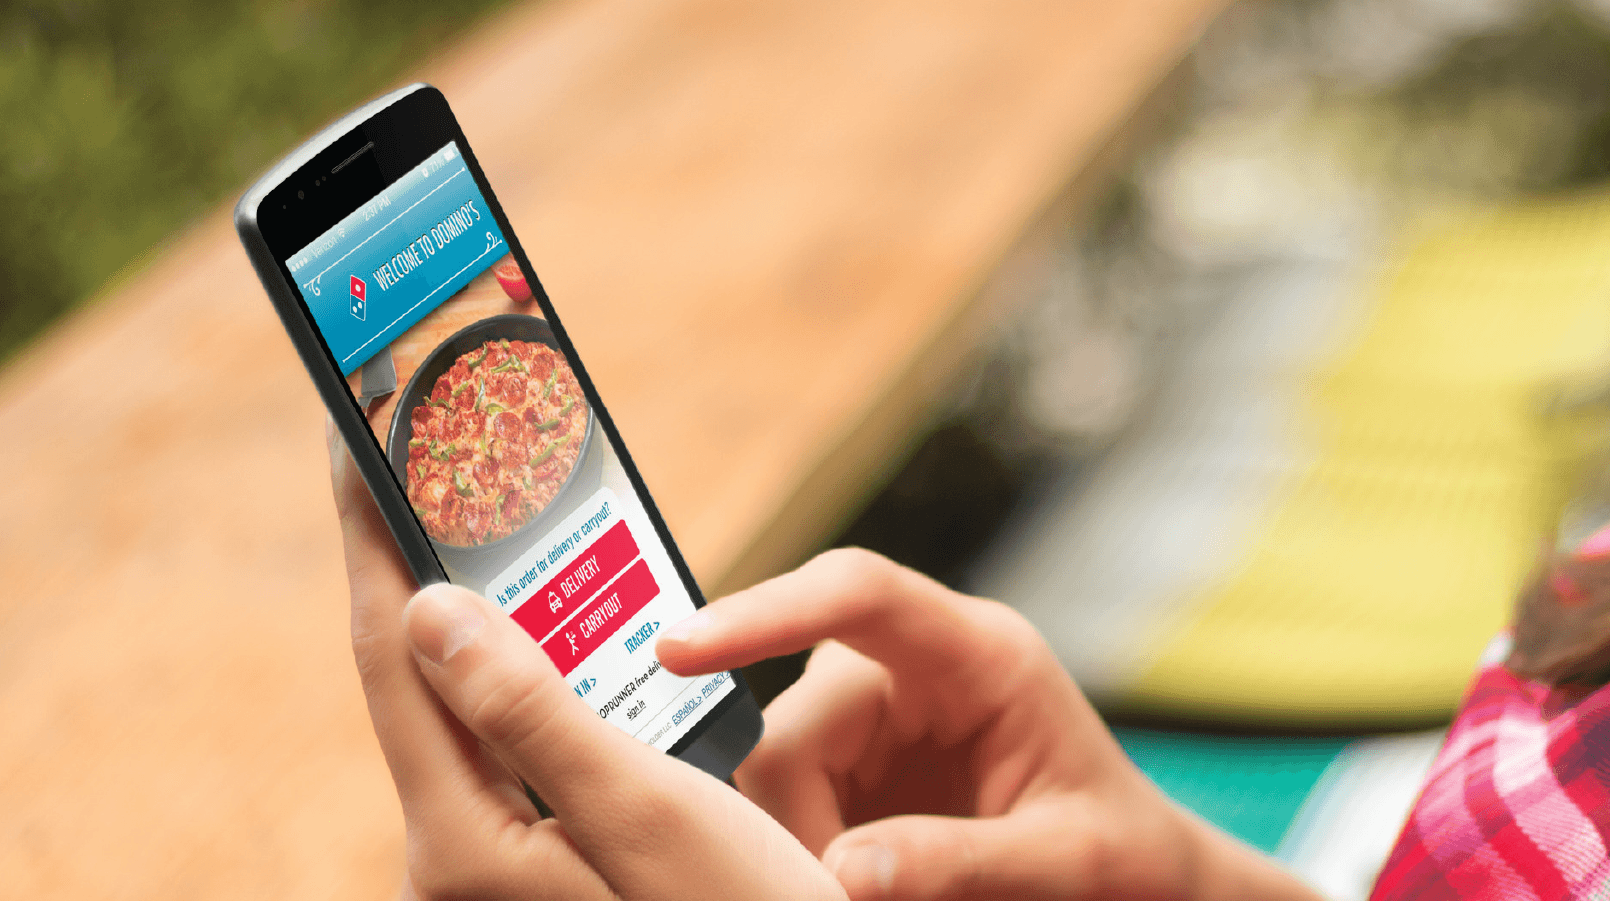 Hangry UserTesting: Domino’s Pizza Mobile Site and App